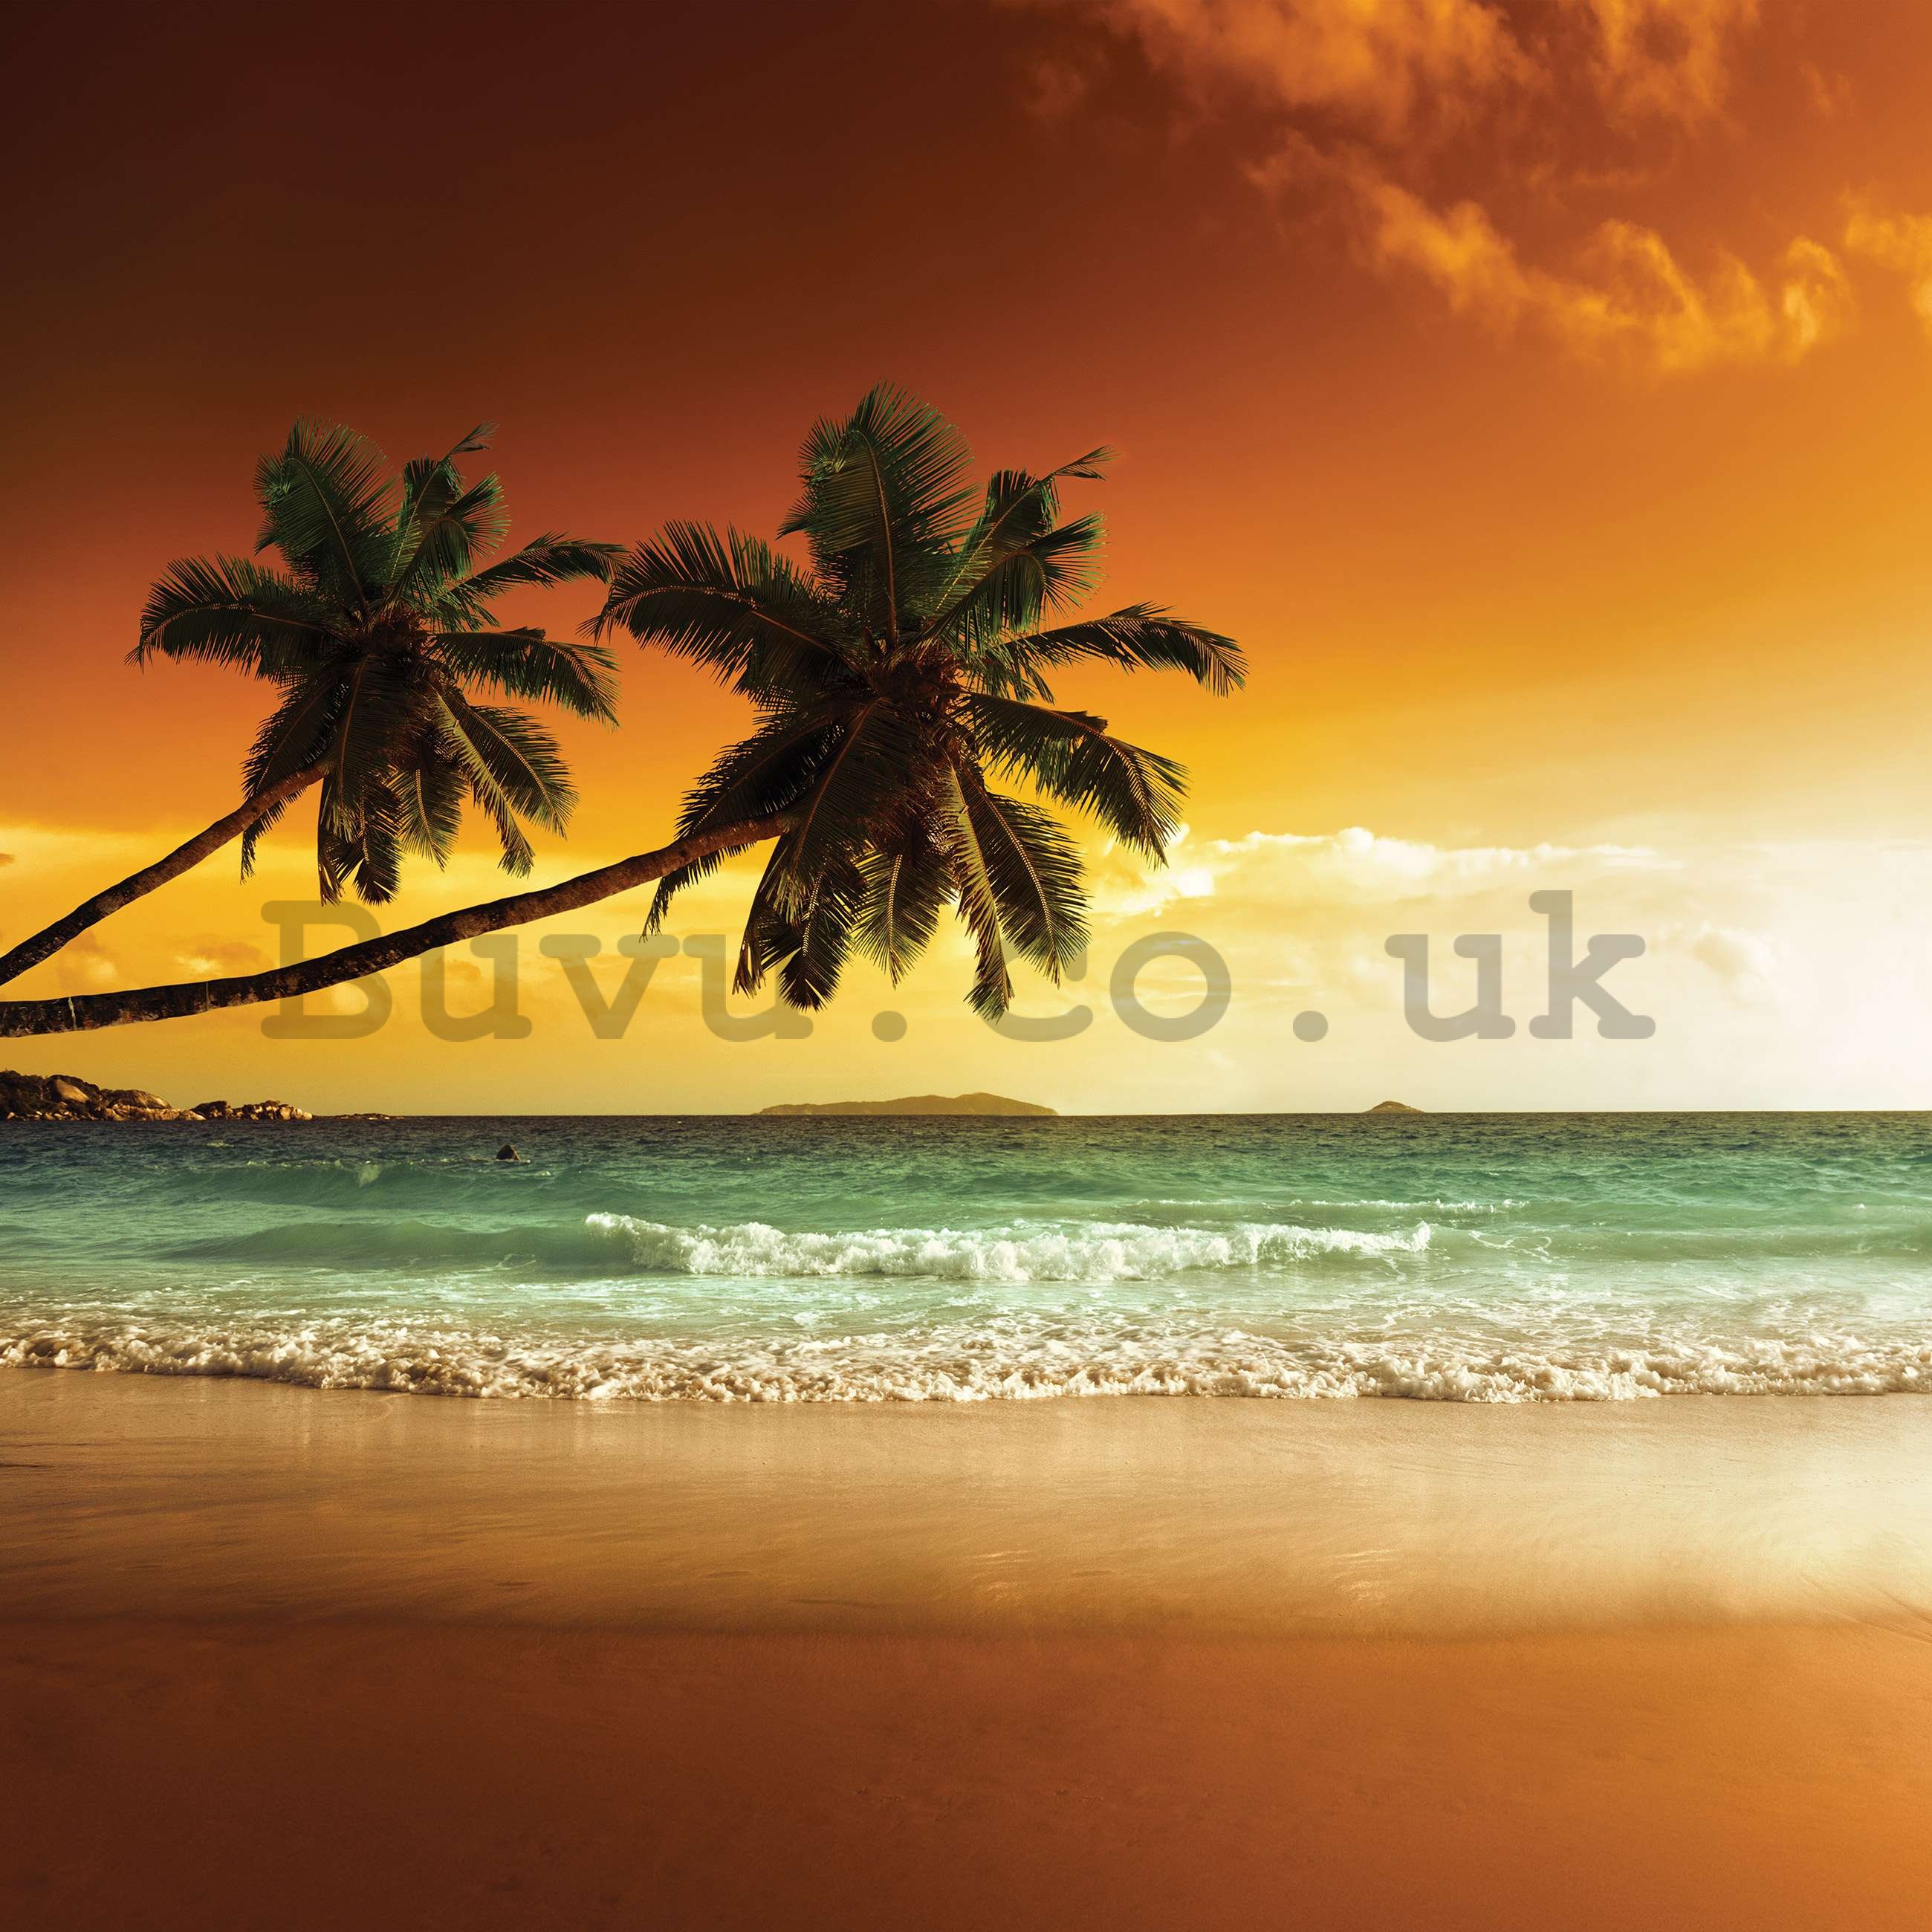 Wall mural vlies: Palm trees and beach at sunset - 416x254 cm